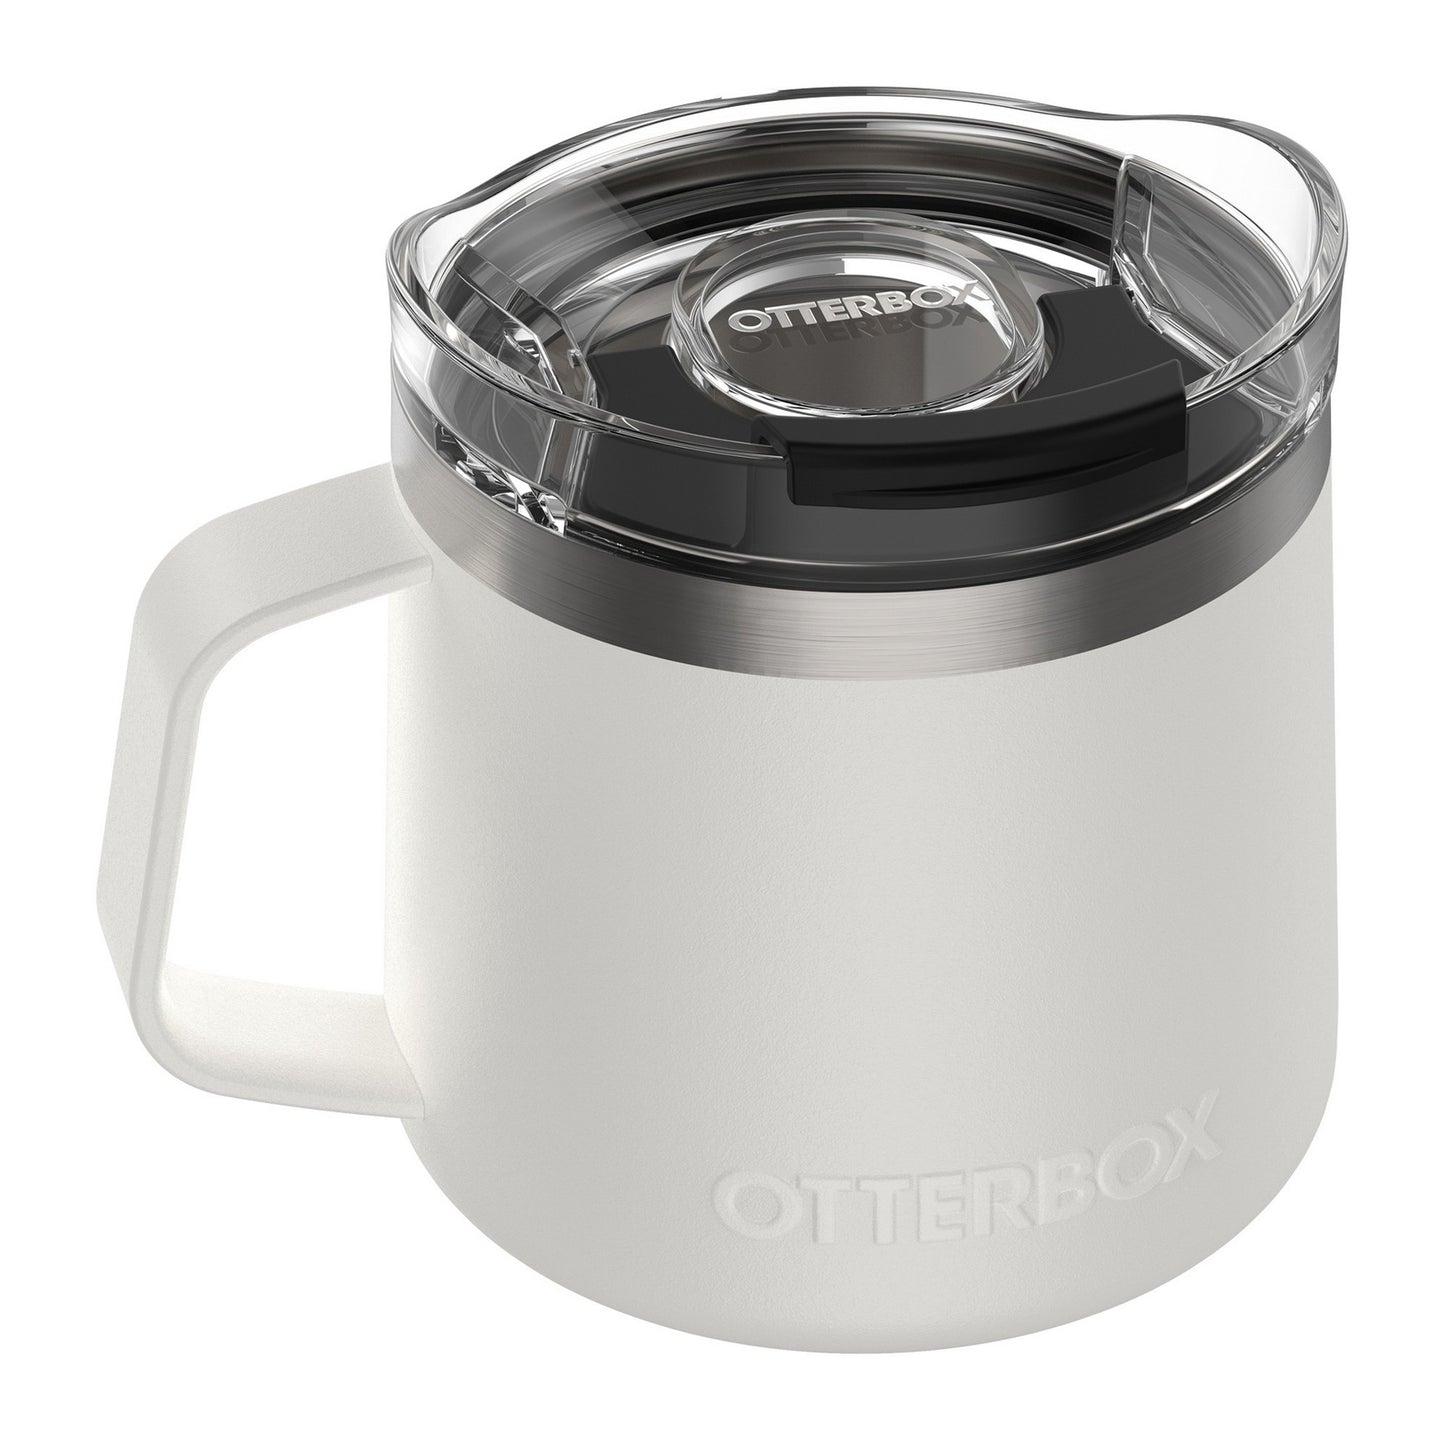 Otterbox 14oz Elevation Tumbler w/Closed Lid - White/Silver (Ice Cap) - 15-11827